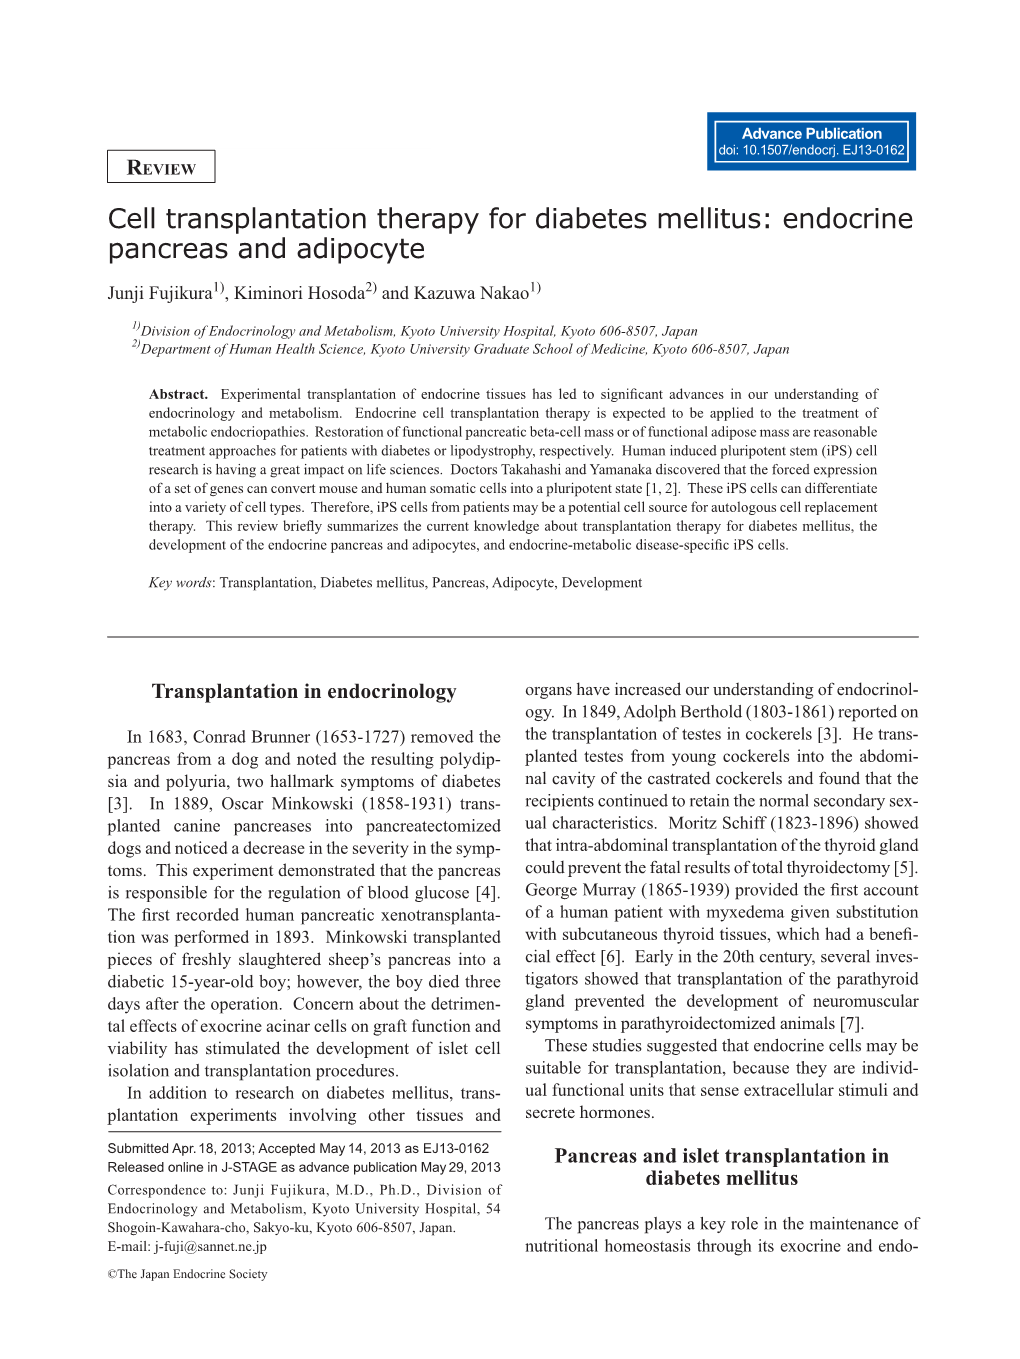 Cell Transplantation Therapy for Diabetes Mellitus: Endocrine Pancreas and Adipocyte